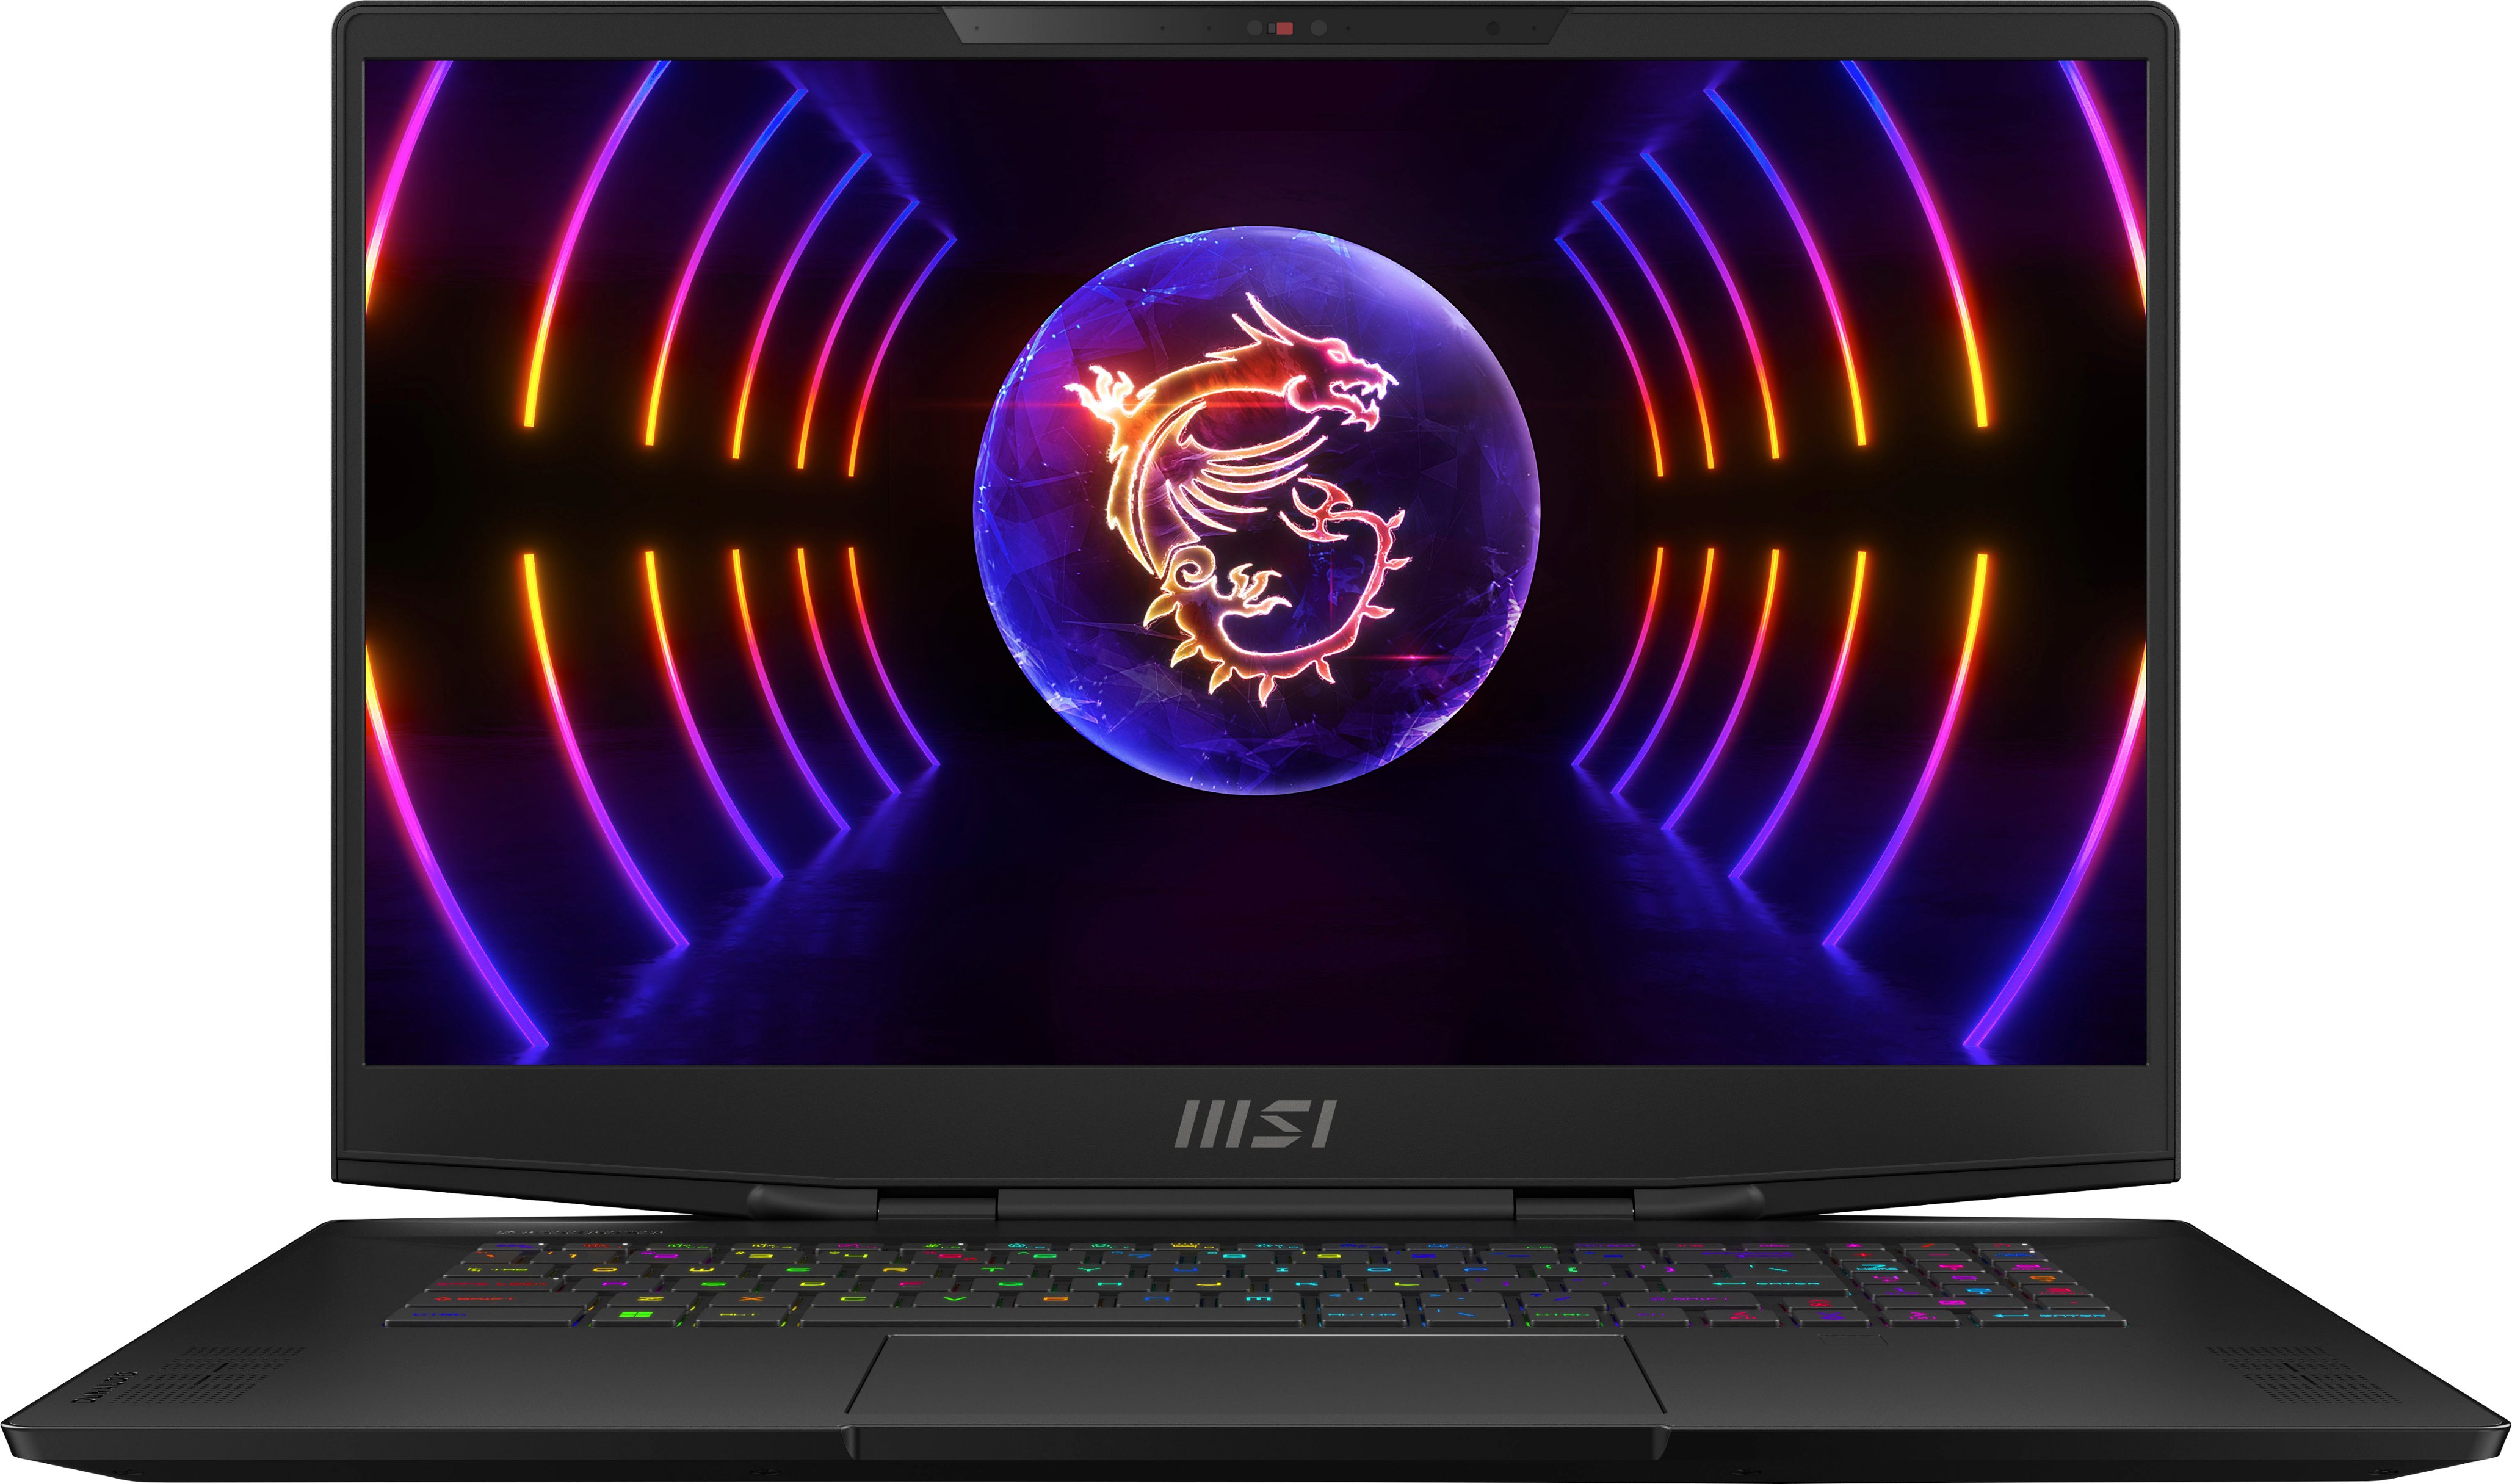 Whoa! This RTX-powered MSI gaming laptop is just $599 for Black Friday